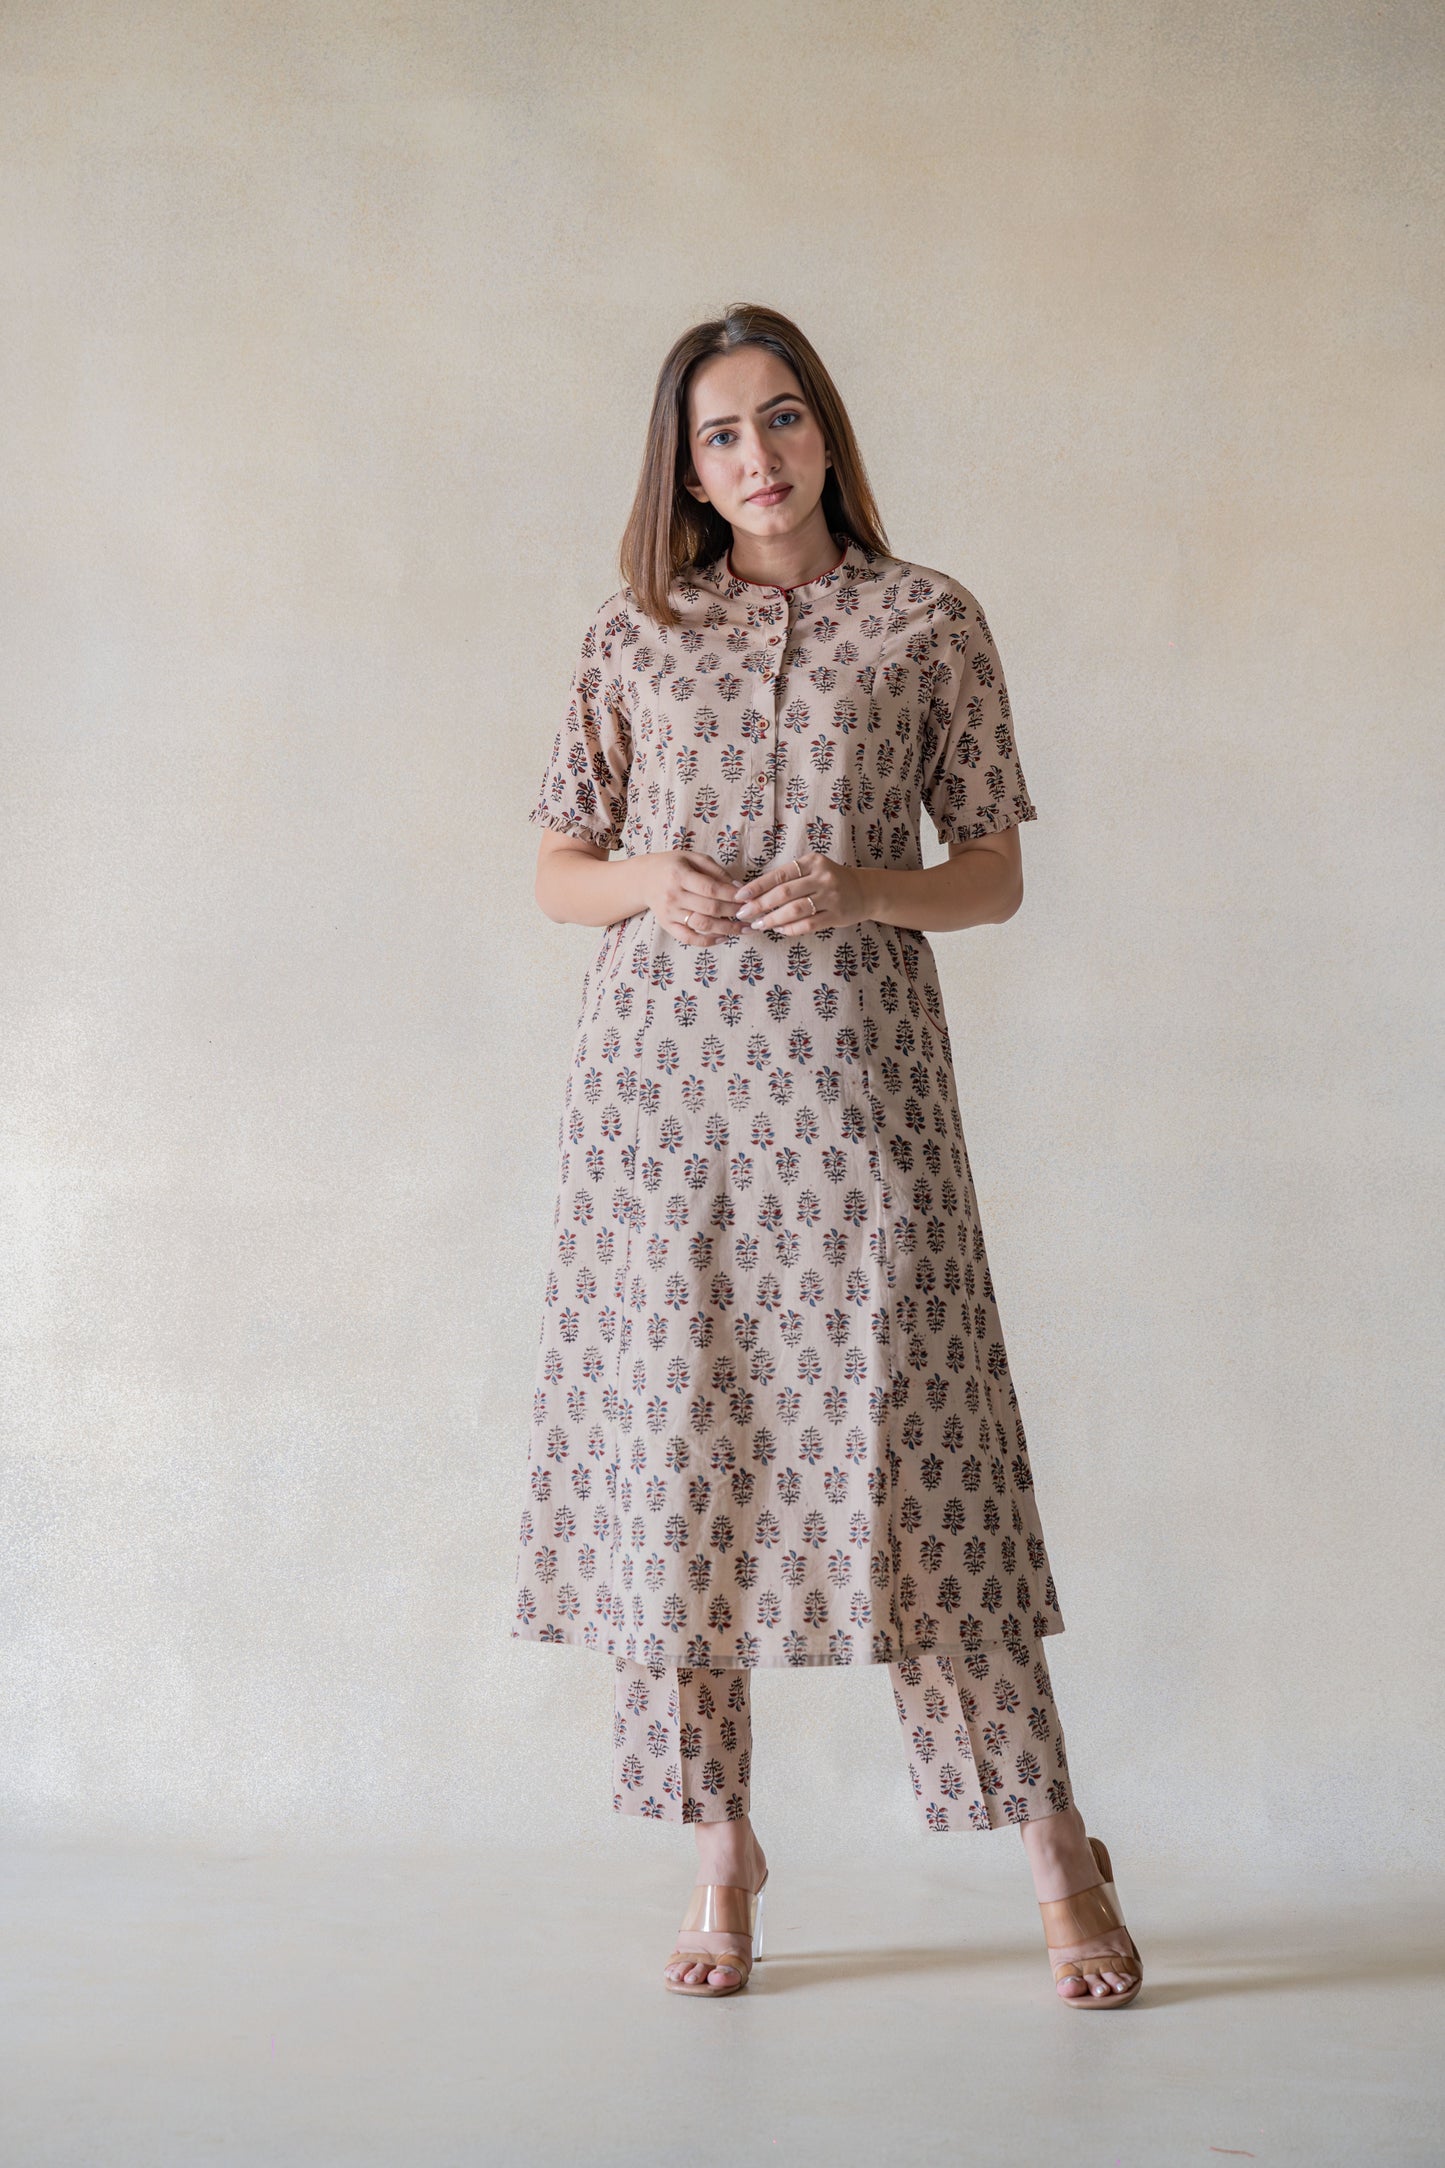 Exquisitely handcrafted with sourced materials, the Vrinda Co-ord Set is designed to bring effortless sophistication into your wardrobe. The ajrakh boota print kurta and pants set, dyed with natural resources, feature a mandarin collared neck, frills on the sleeves hem, and front pockets for extra convenience. The pants come with an elasticated waistband for a comfortable fit. This slow-made ensemble is perfect for everyday wear.